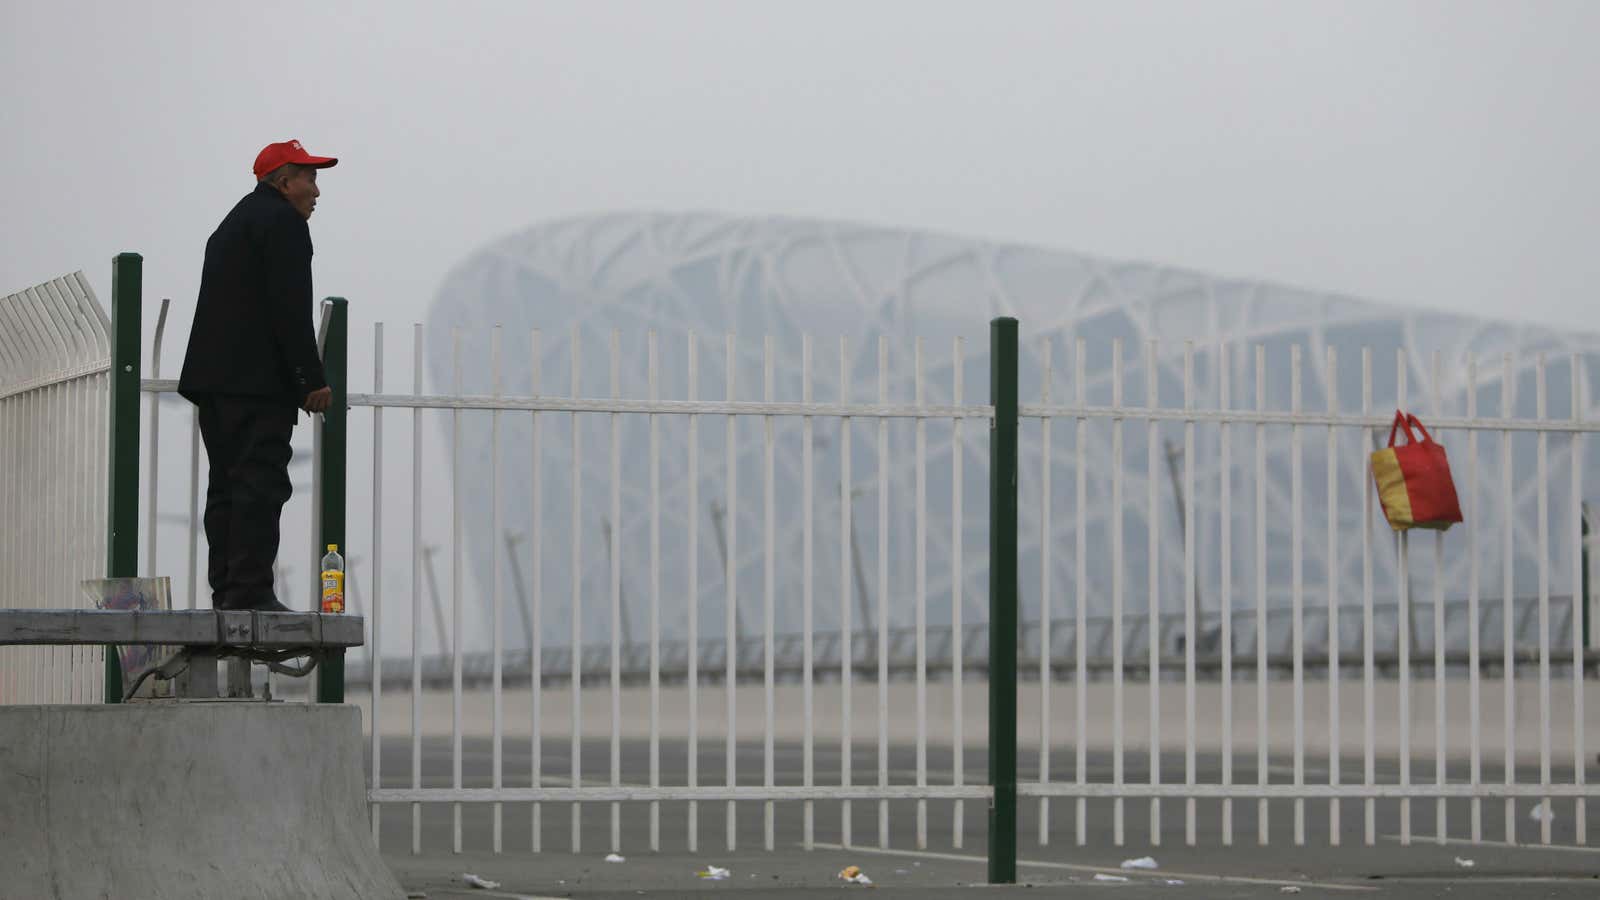 A tourist stands near the National Stadium, also known as the Bird’s Nest, on a smoggy day in Beijing.